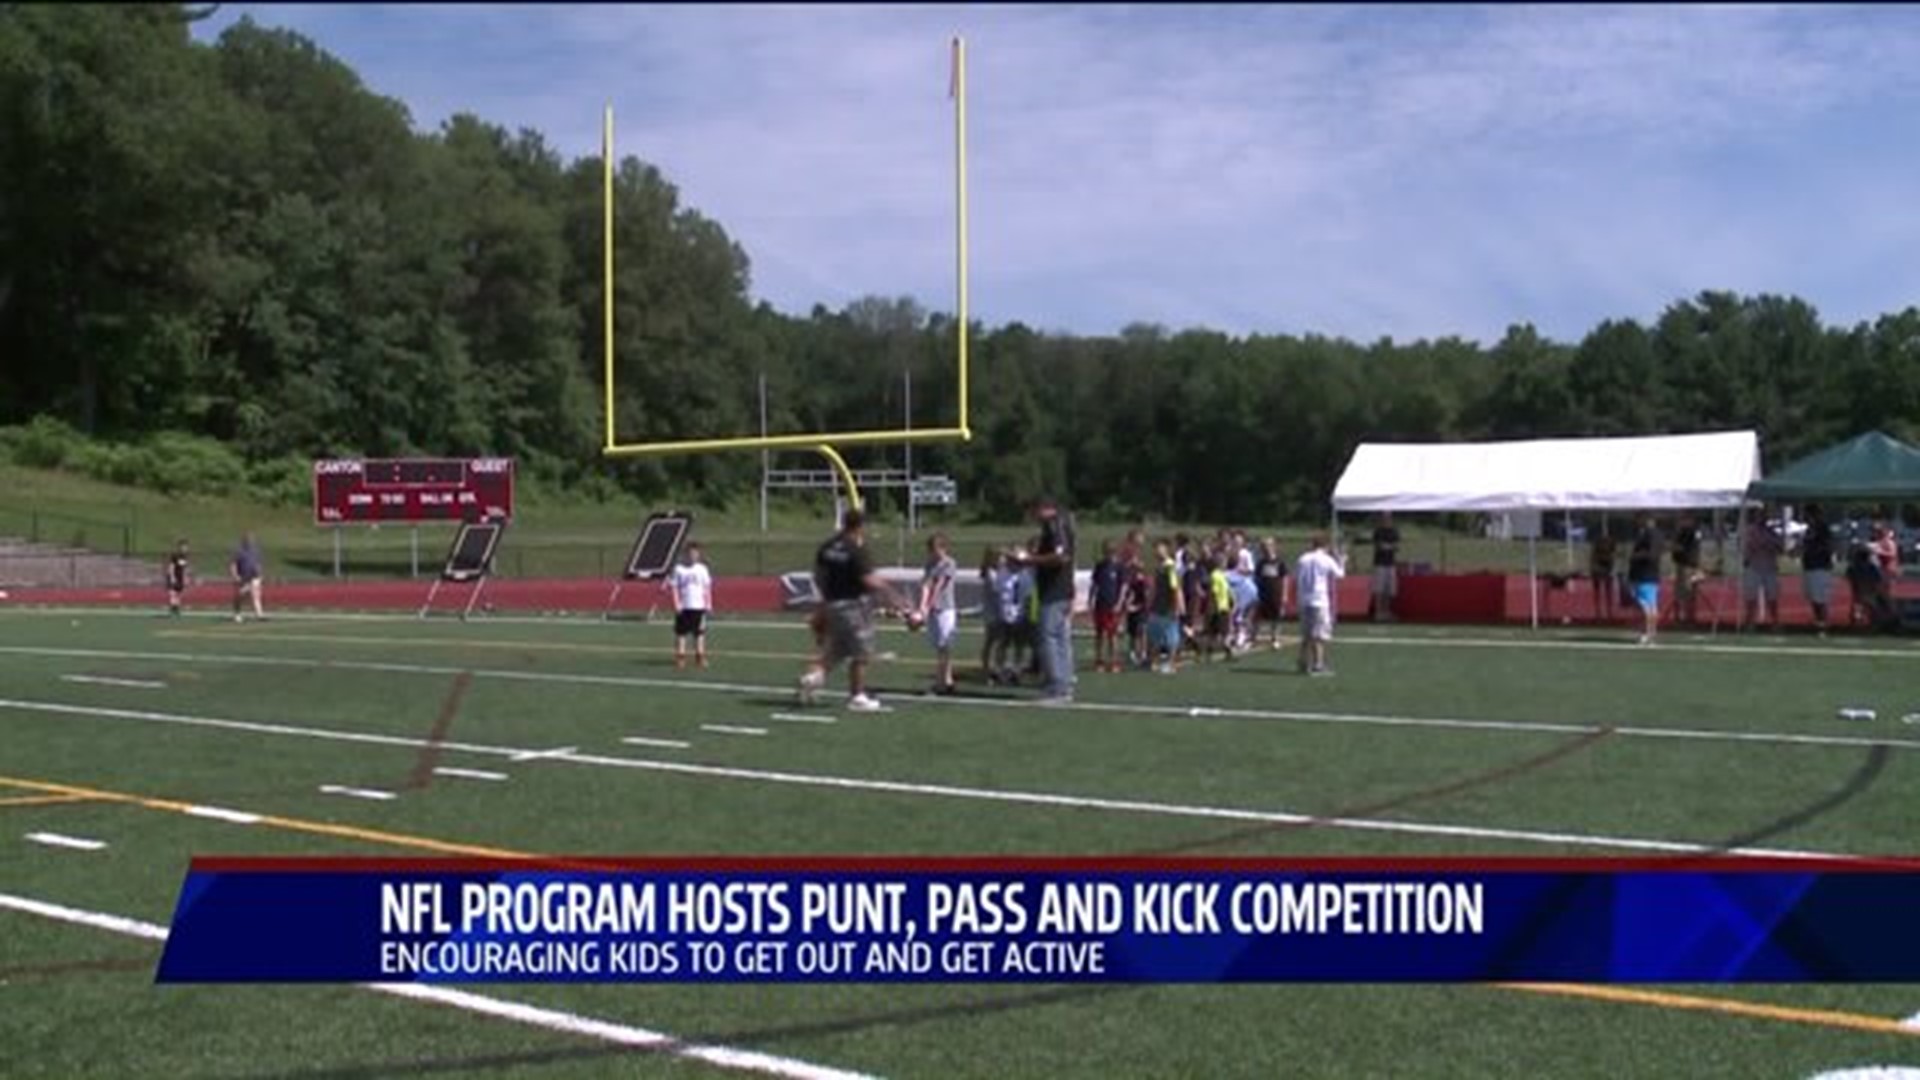 Punt, pass and kick competition held by NFL